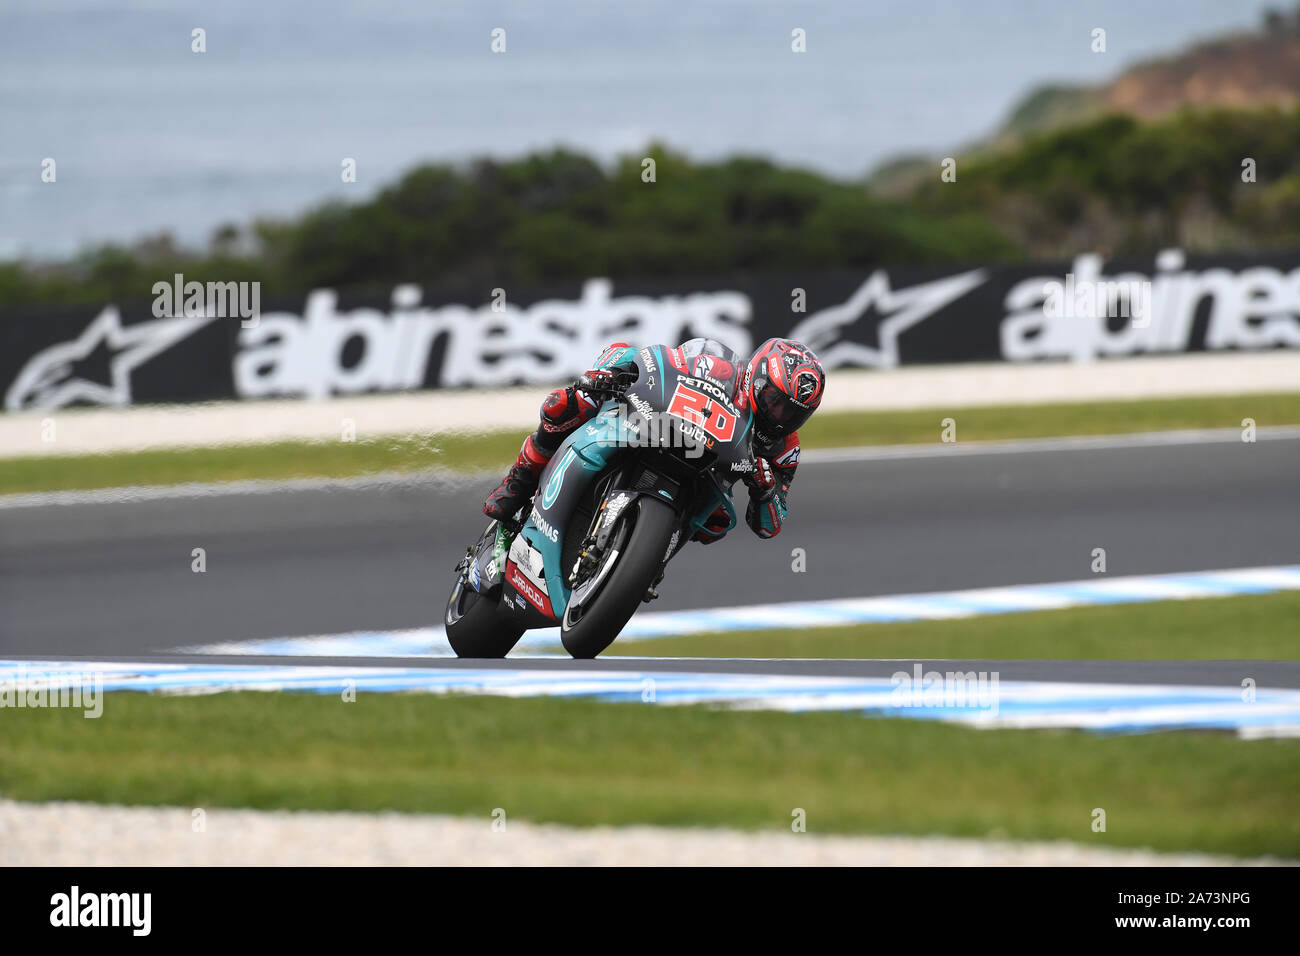 MotoGP Fabio Quartararo powers out of Siberia with the sea in the background on the Yamaha during Warm Up. Stock Photo